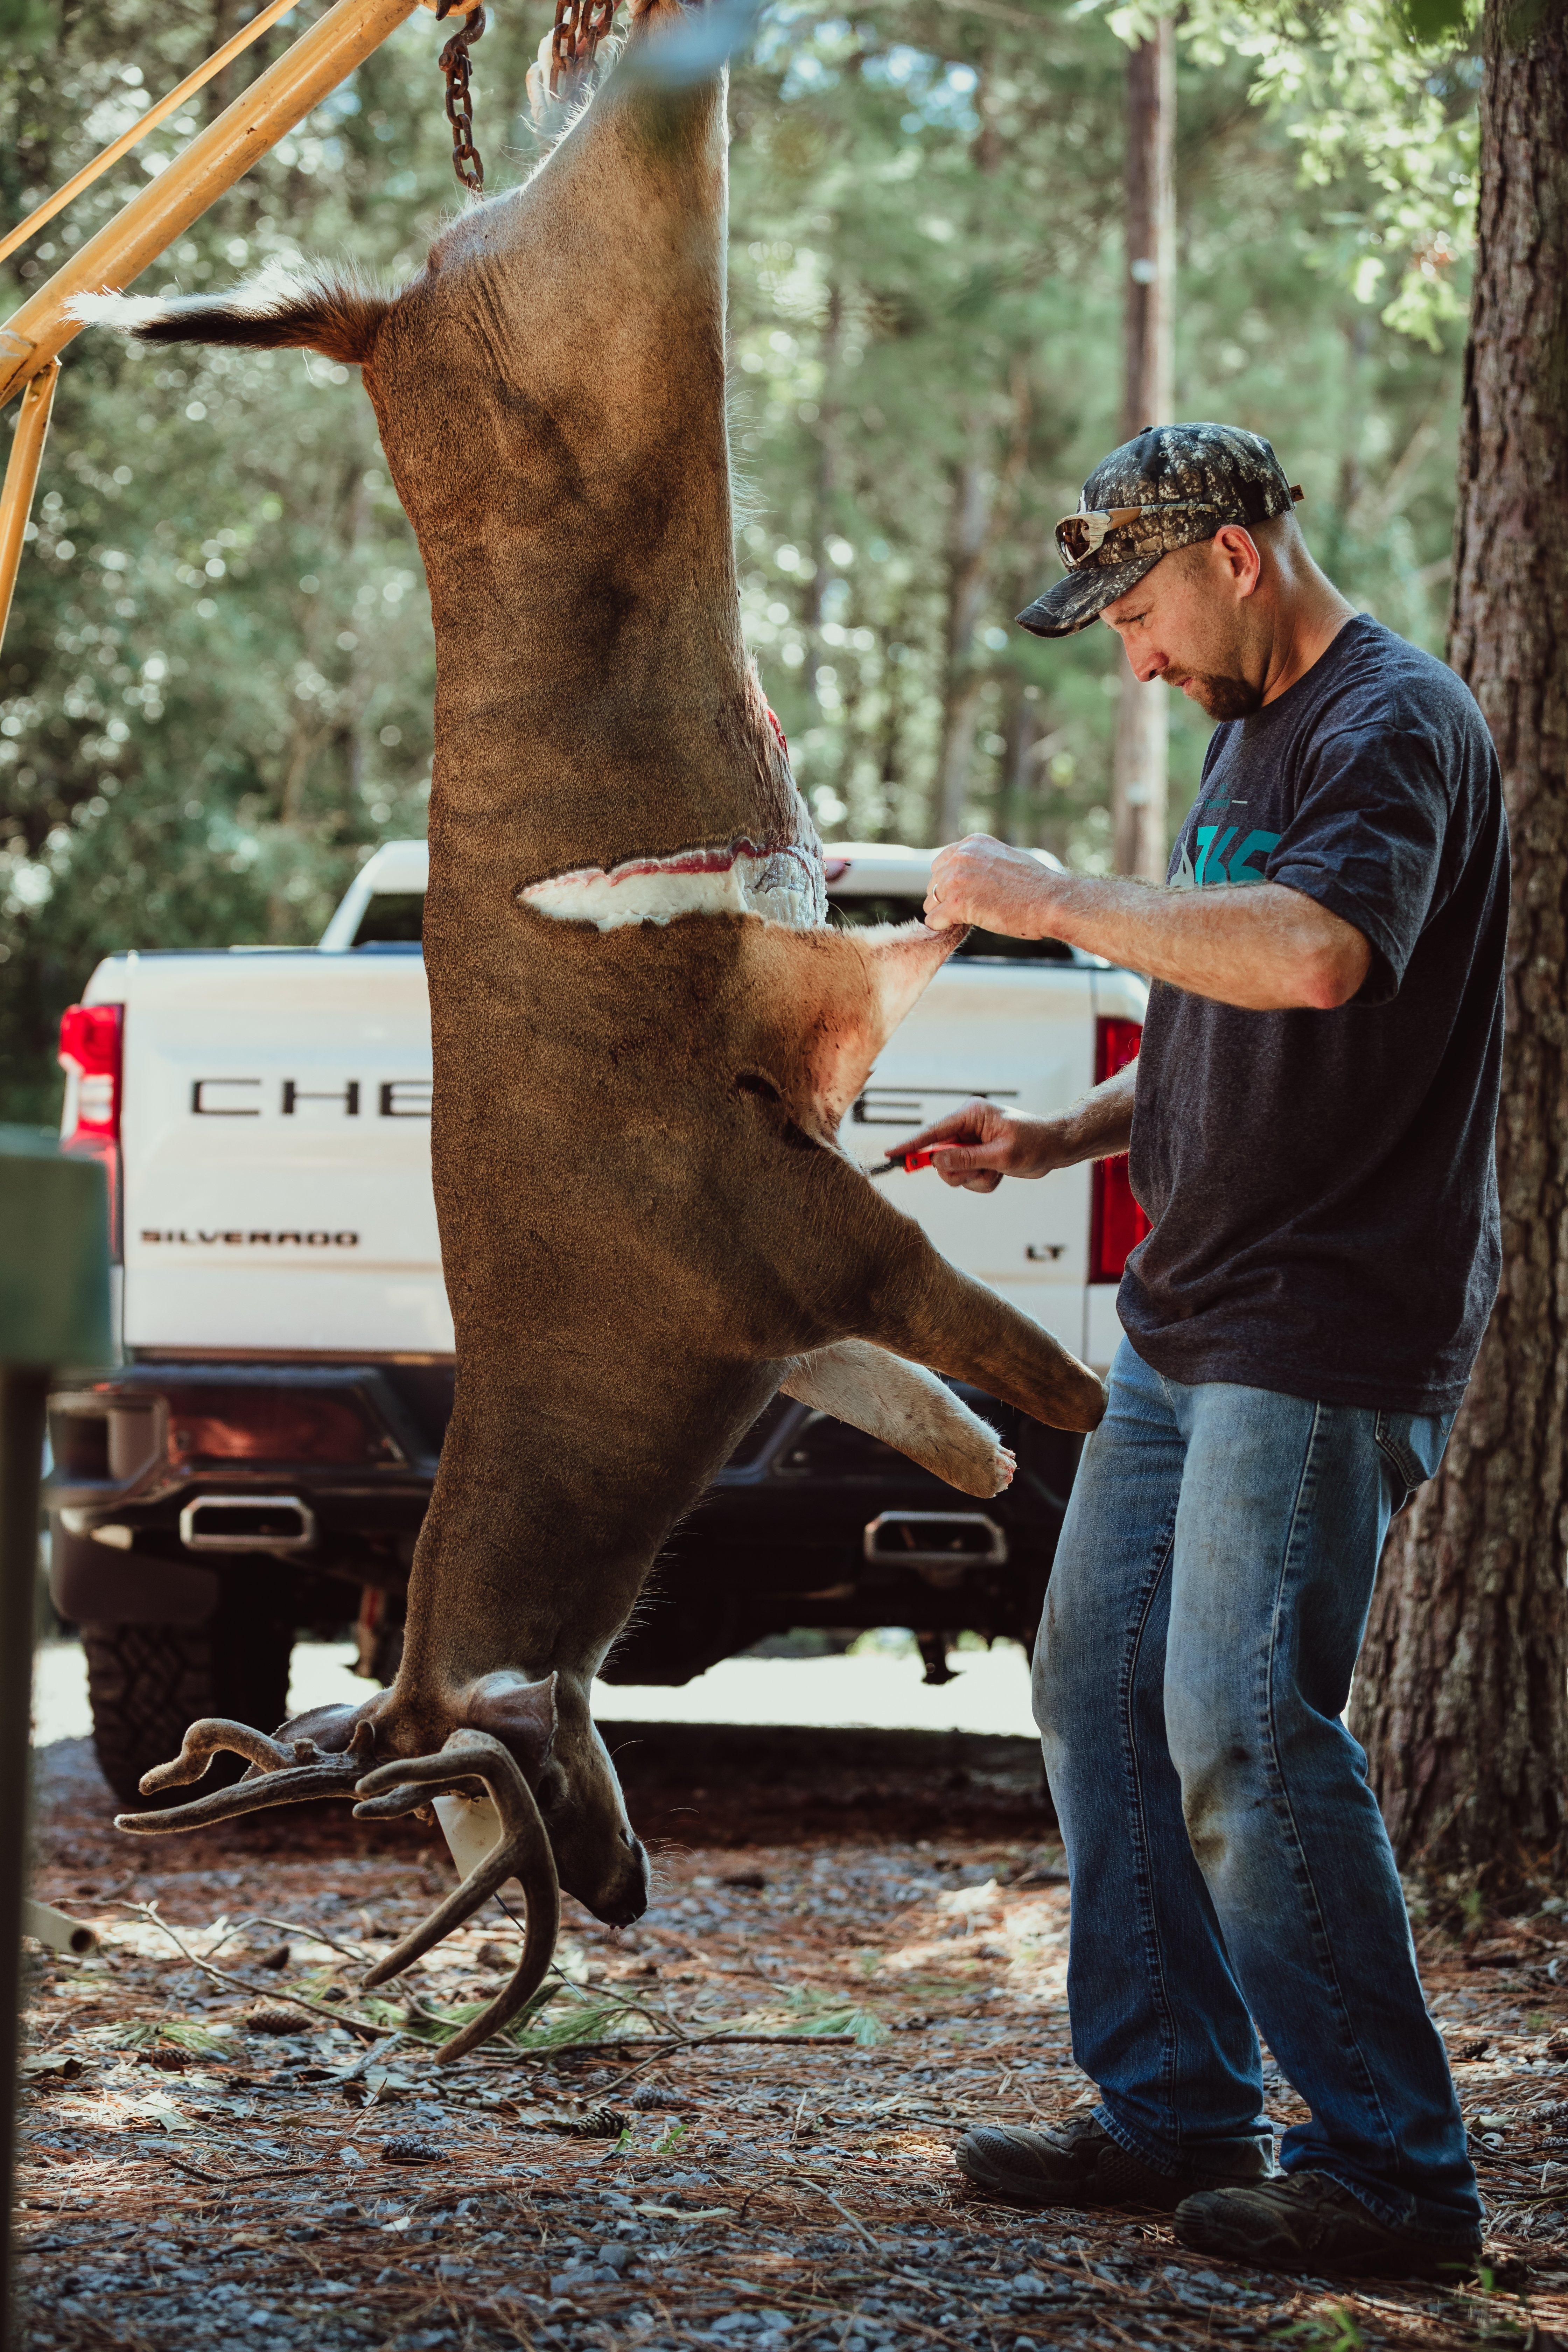 Good venison begins with clean and proper field care. (Realtree Image / Kerry Wix)